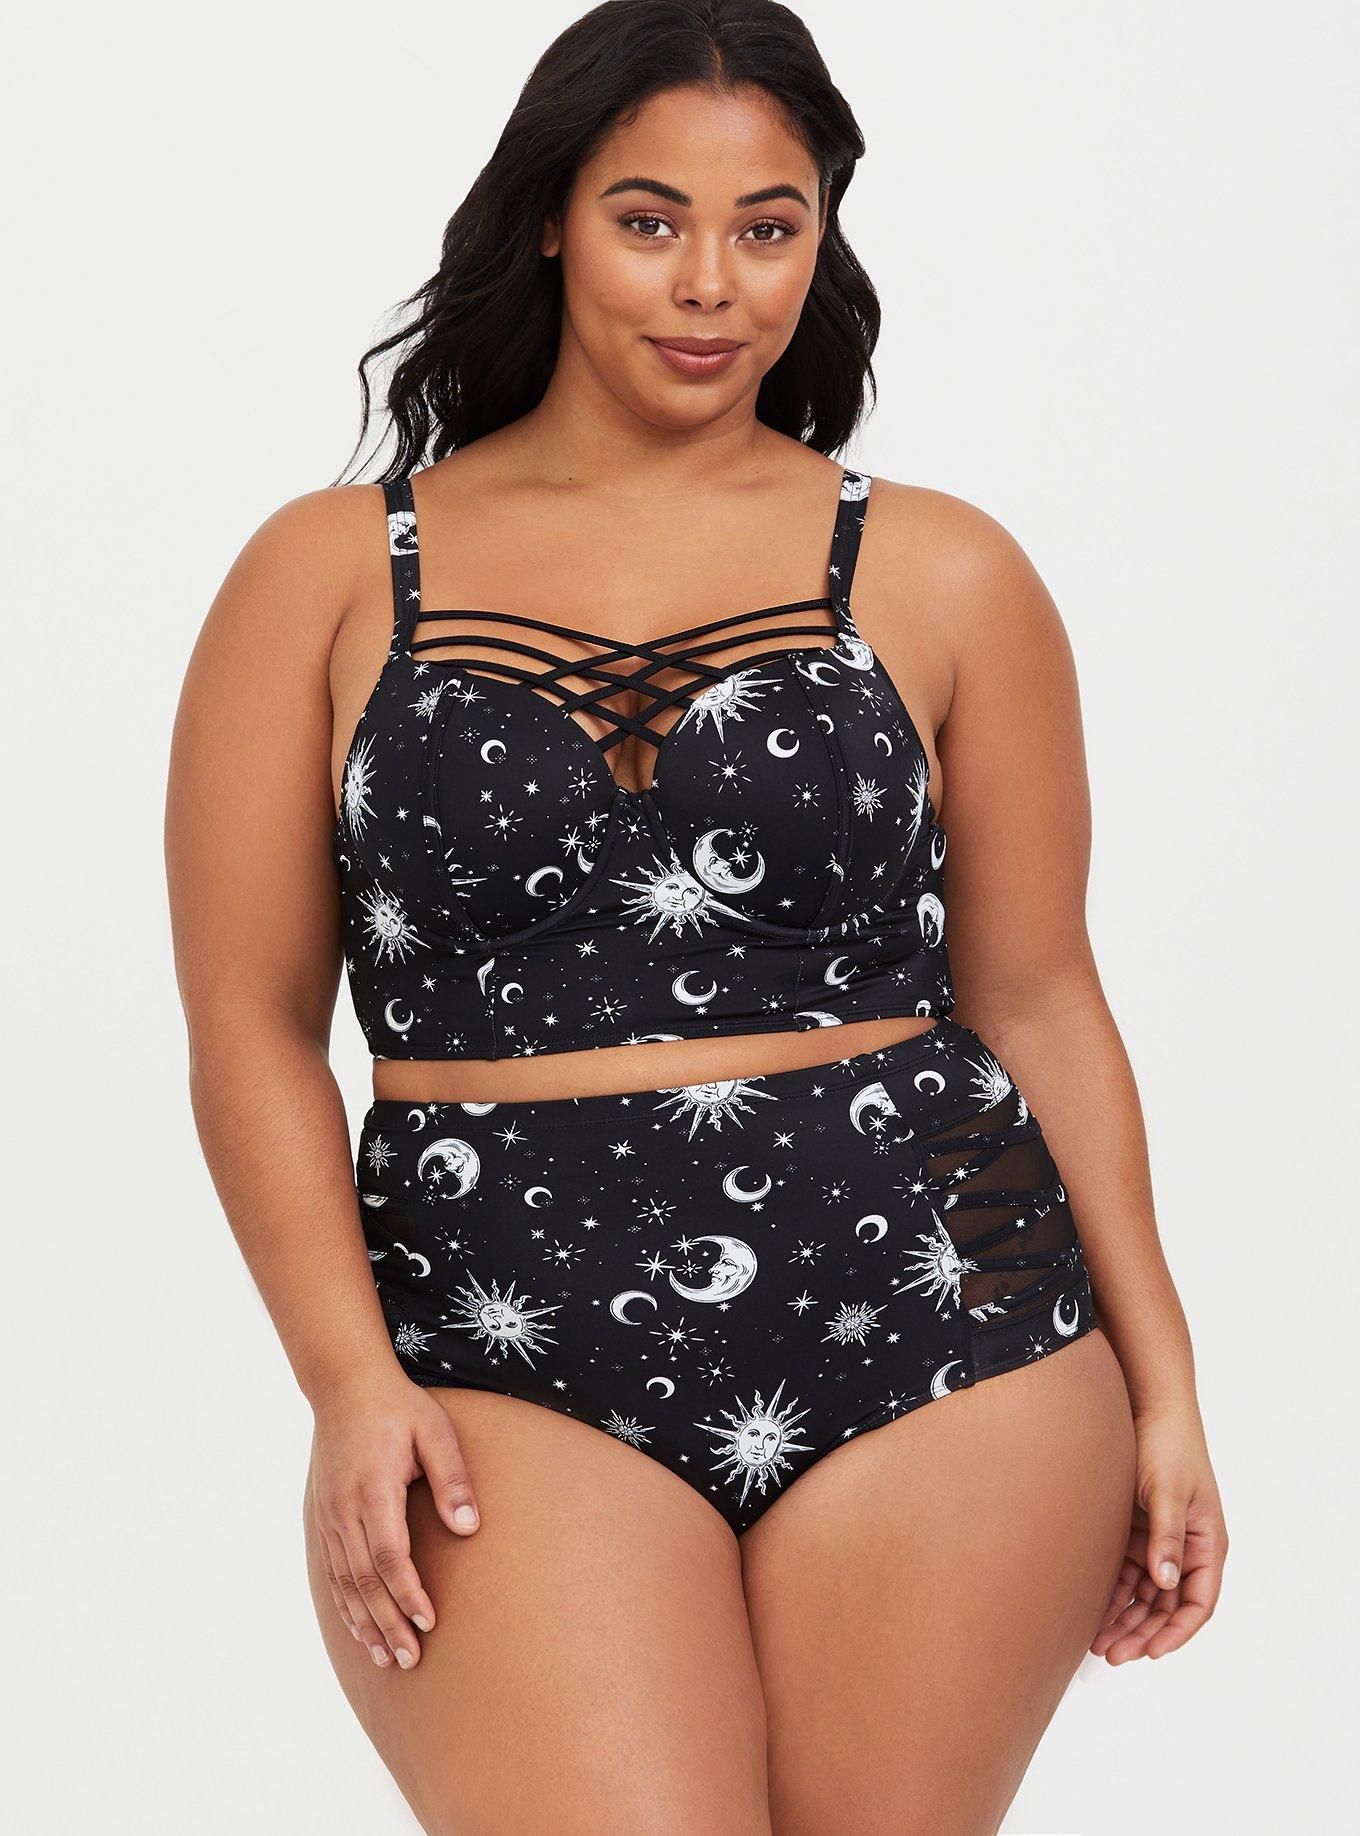 26 Super Sexy Plus Size Two-Piece Swimwear That Your Curves Need